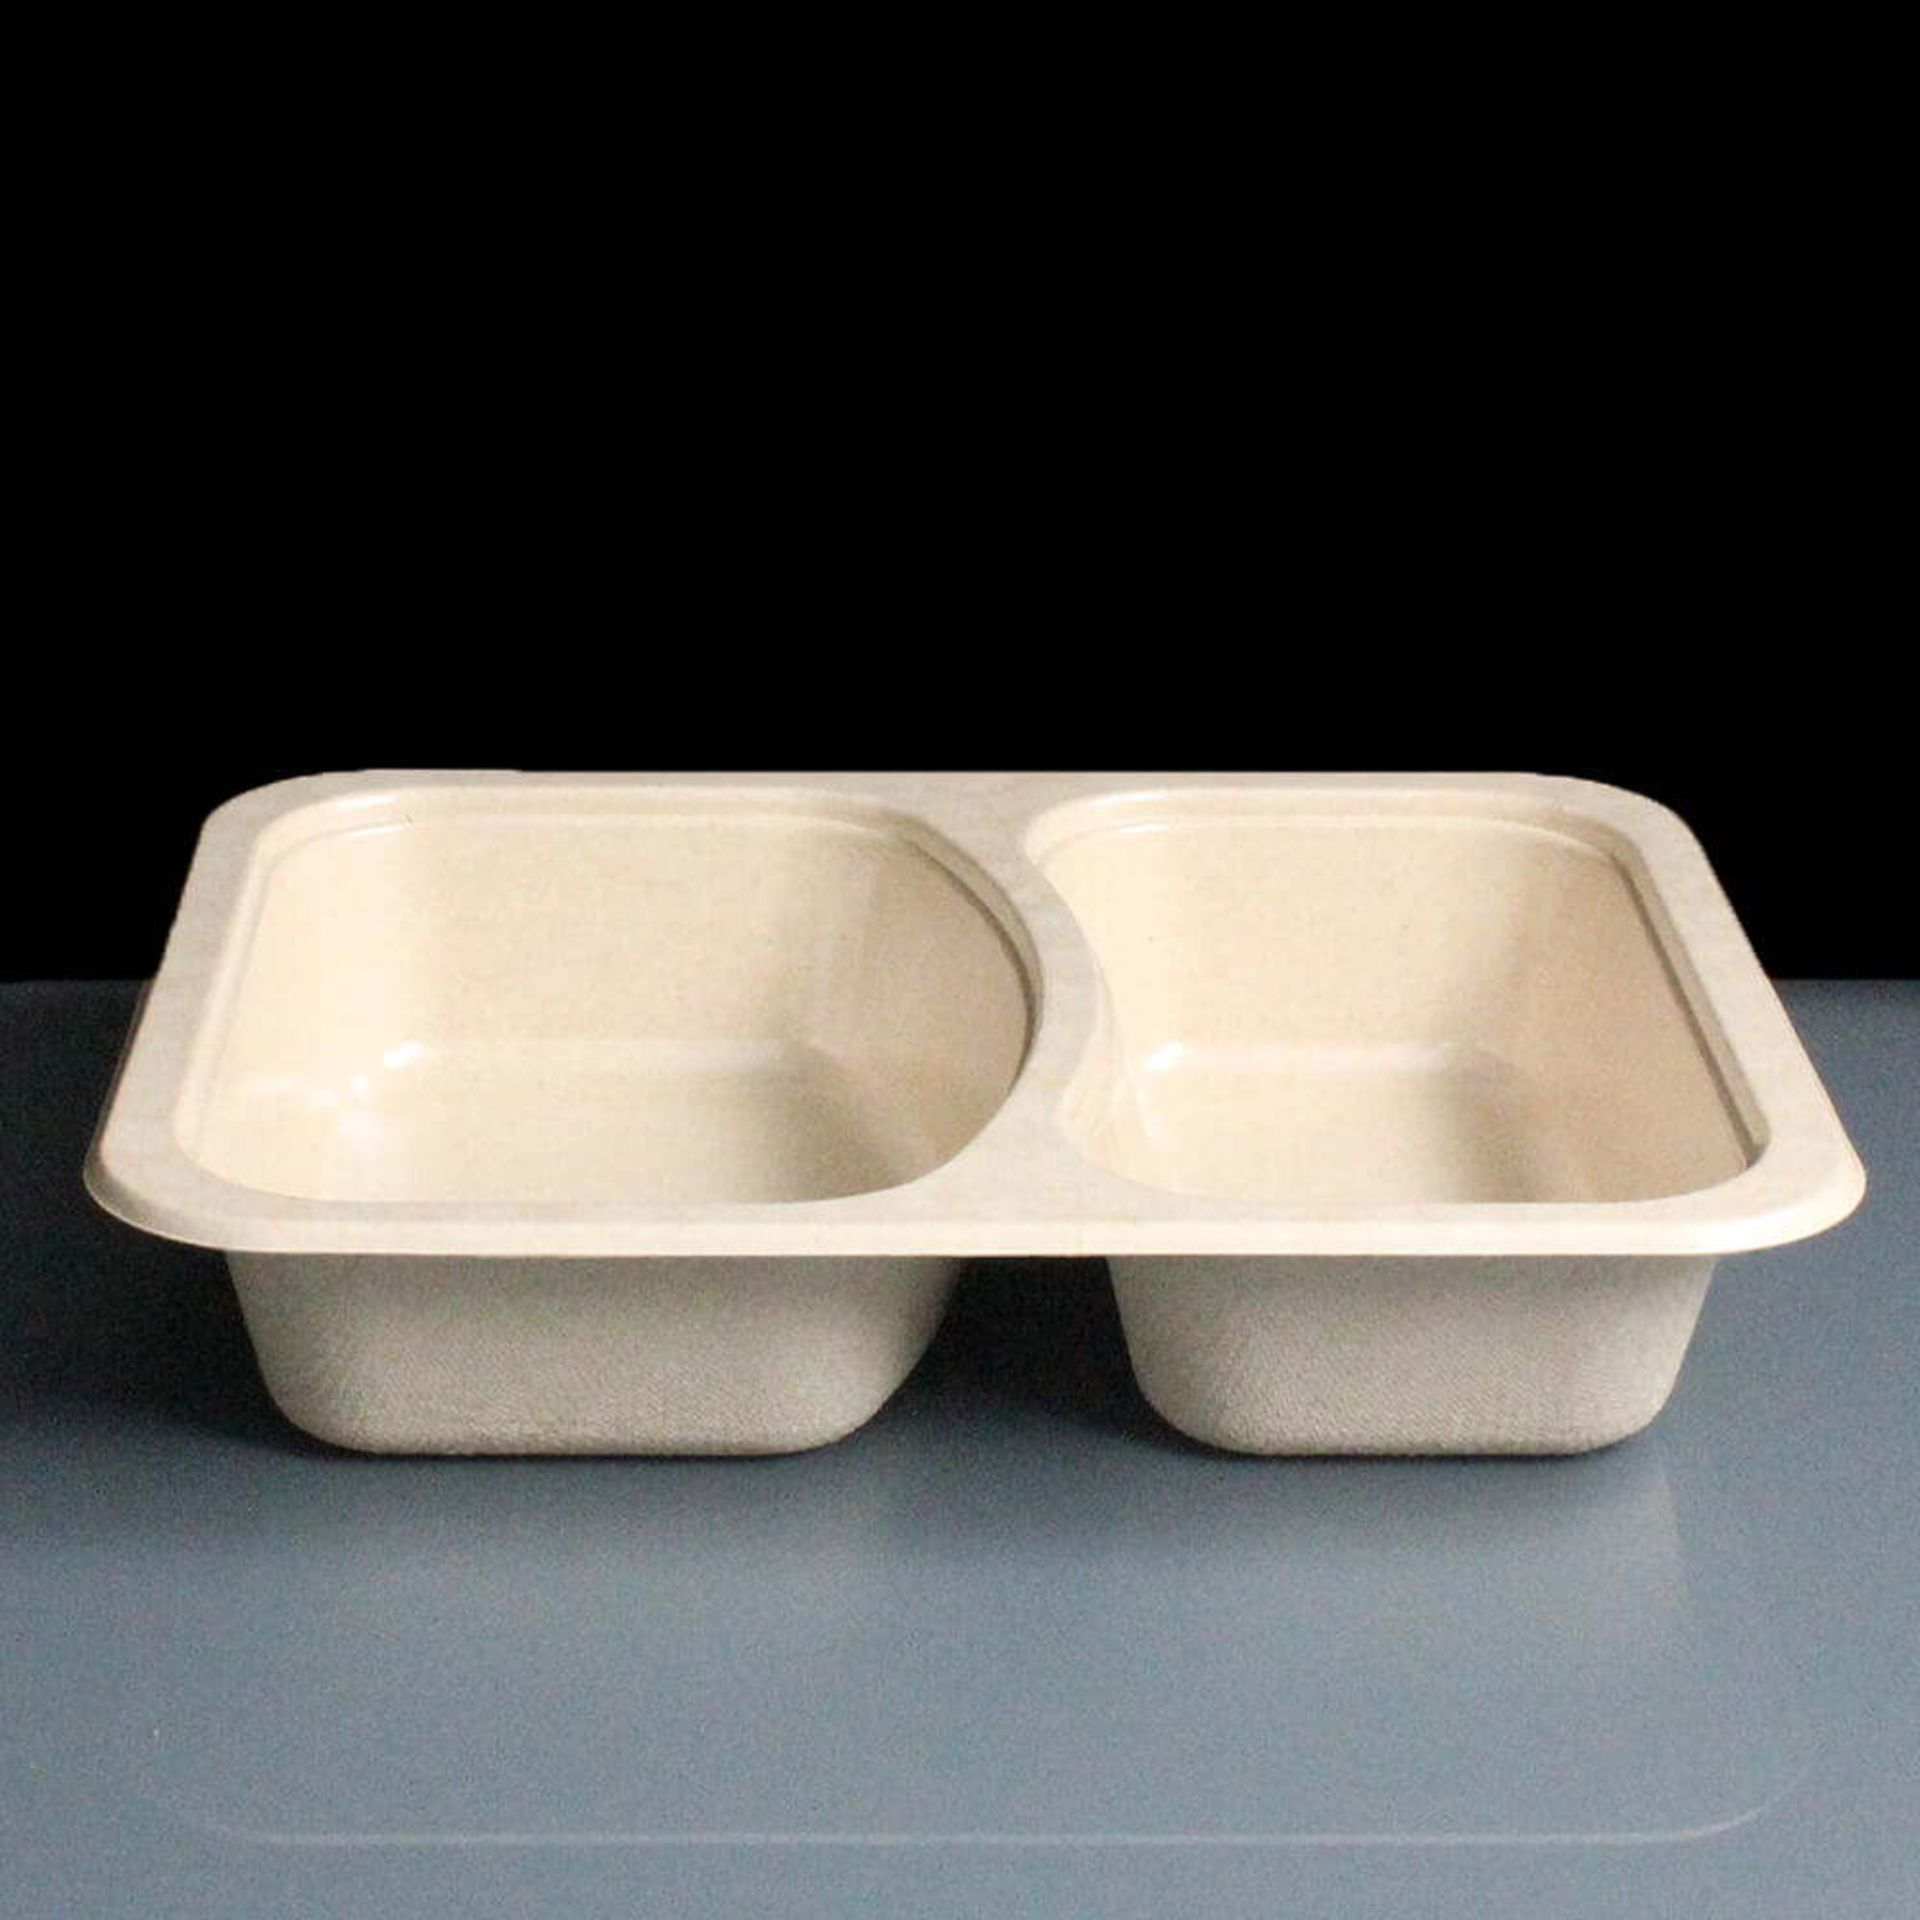 320 x Two Compartment Food Trays - Paper Based With 95% Less Plastic - Can Be Used in Freezers and - Image 6 of 8